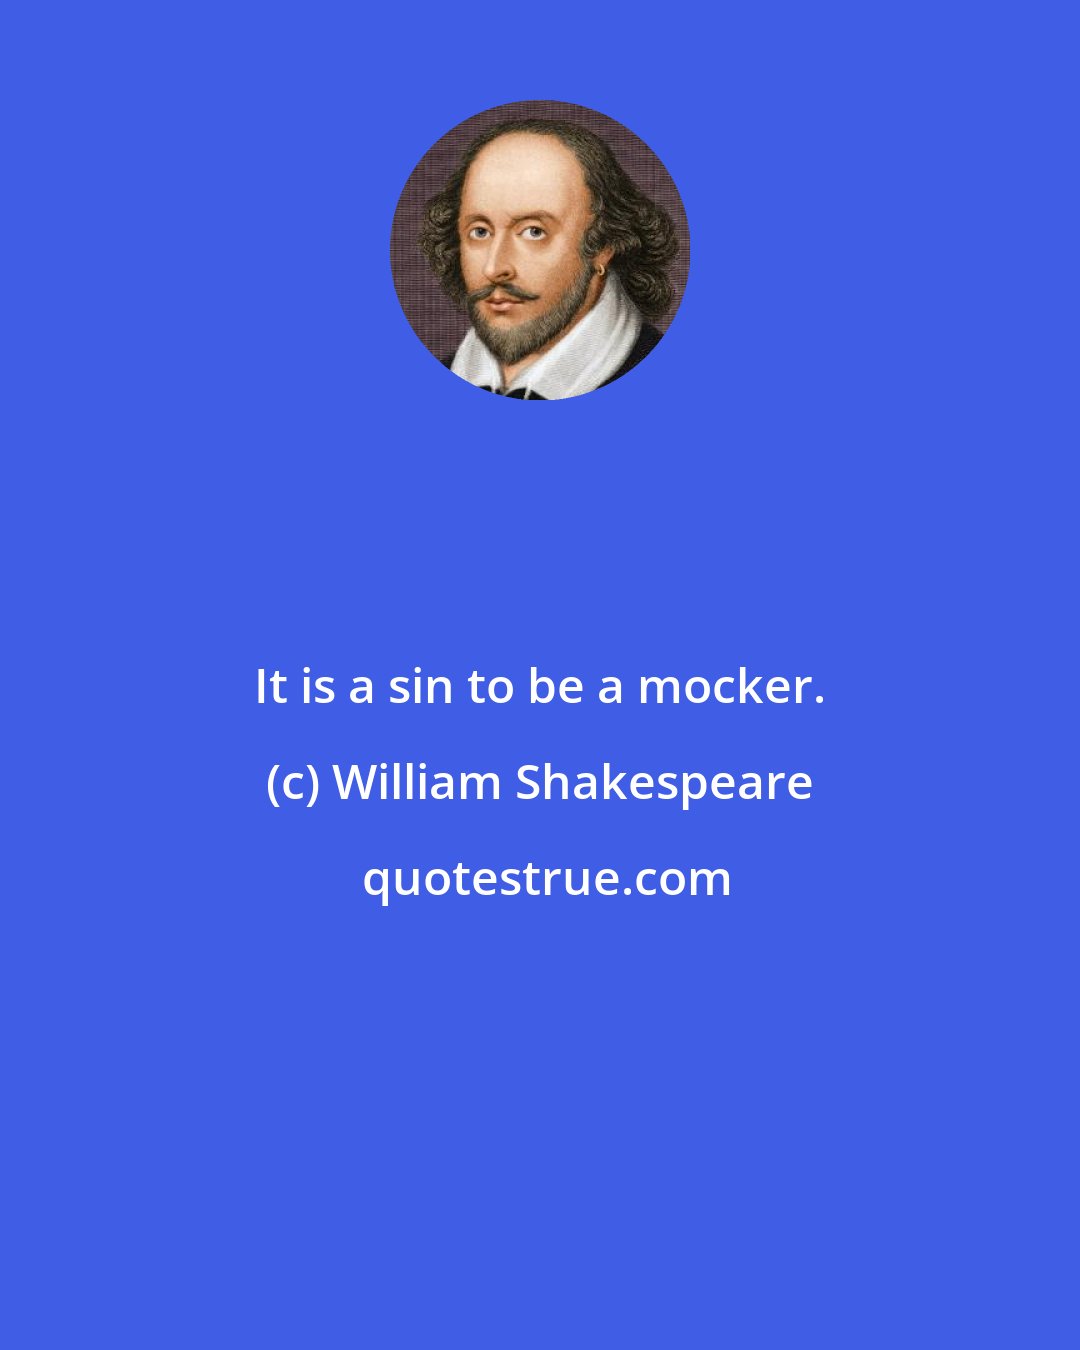 William Shakespeare: It is a sin to be a mocker.